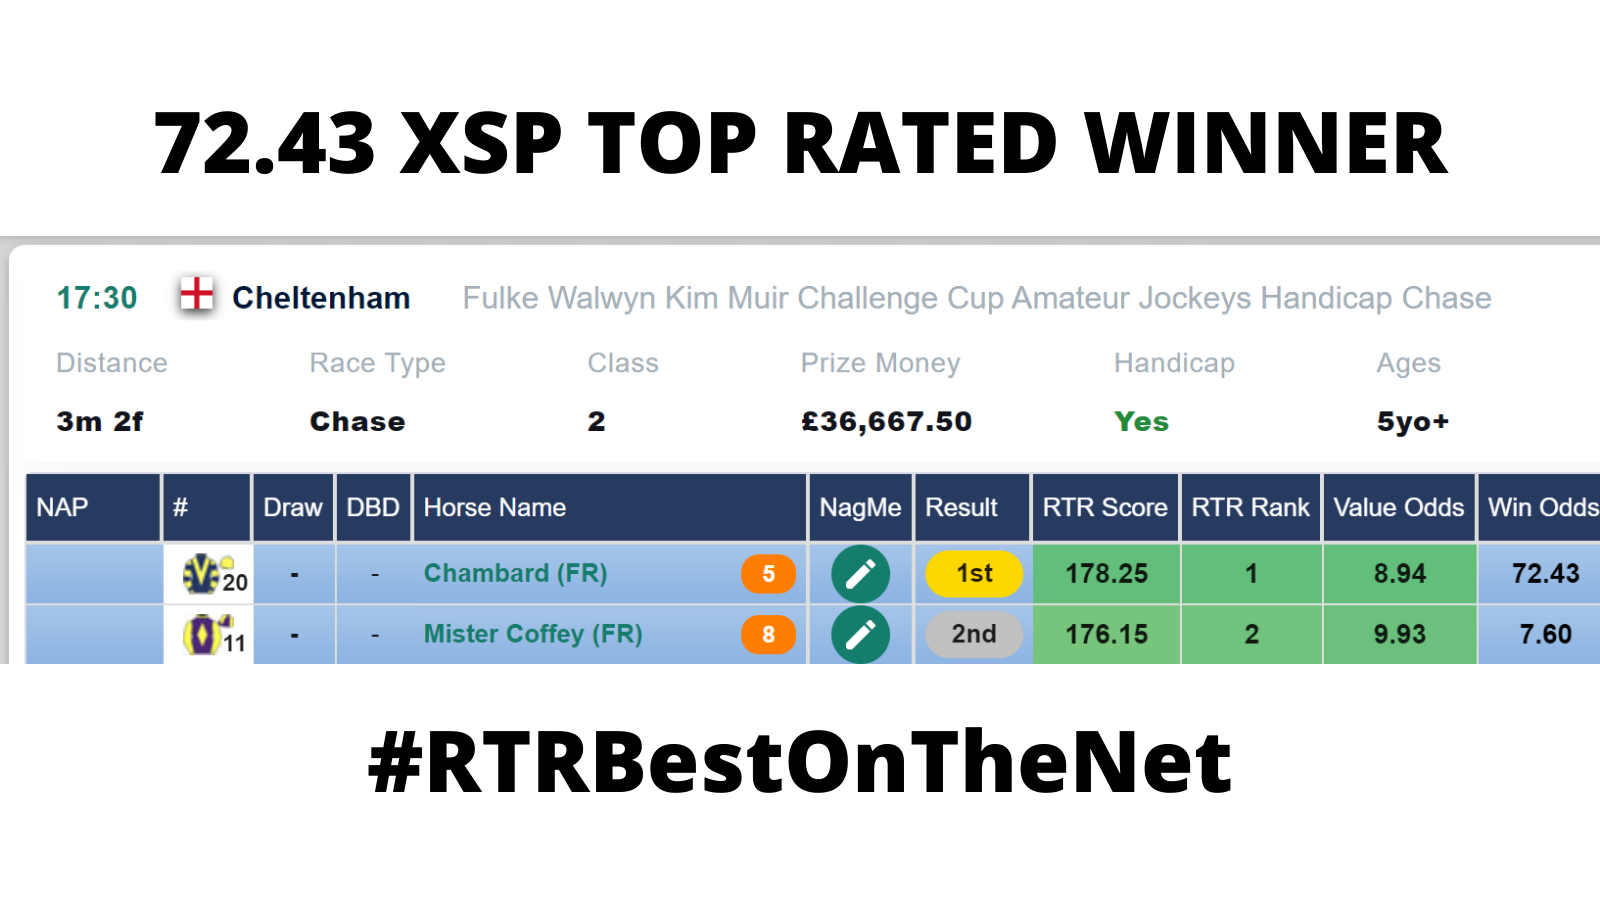 72.43 XSP TOP RATED WINNER